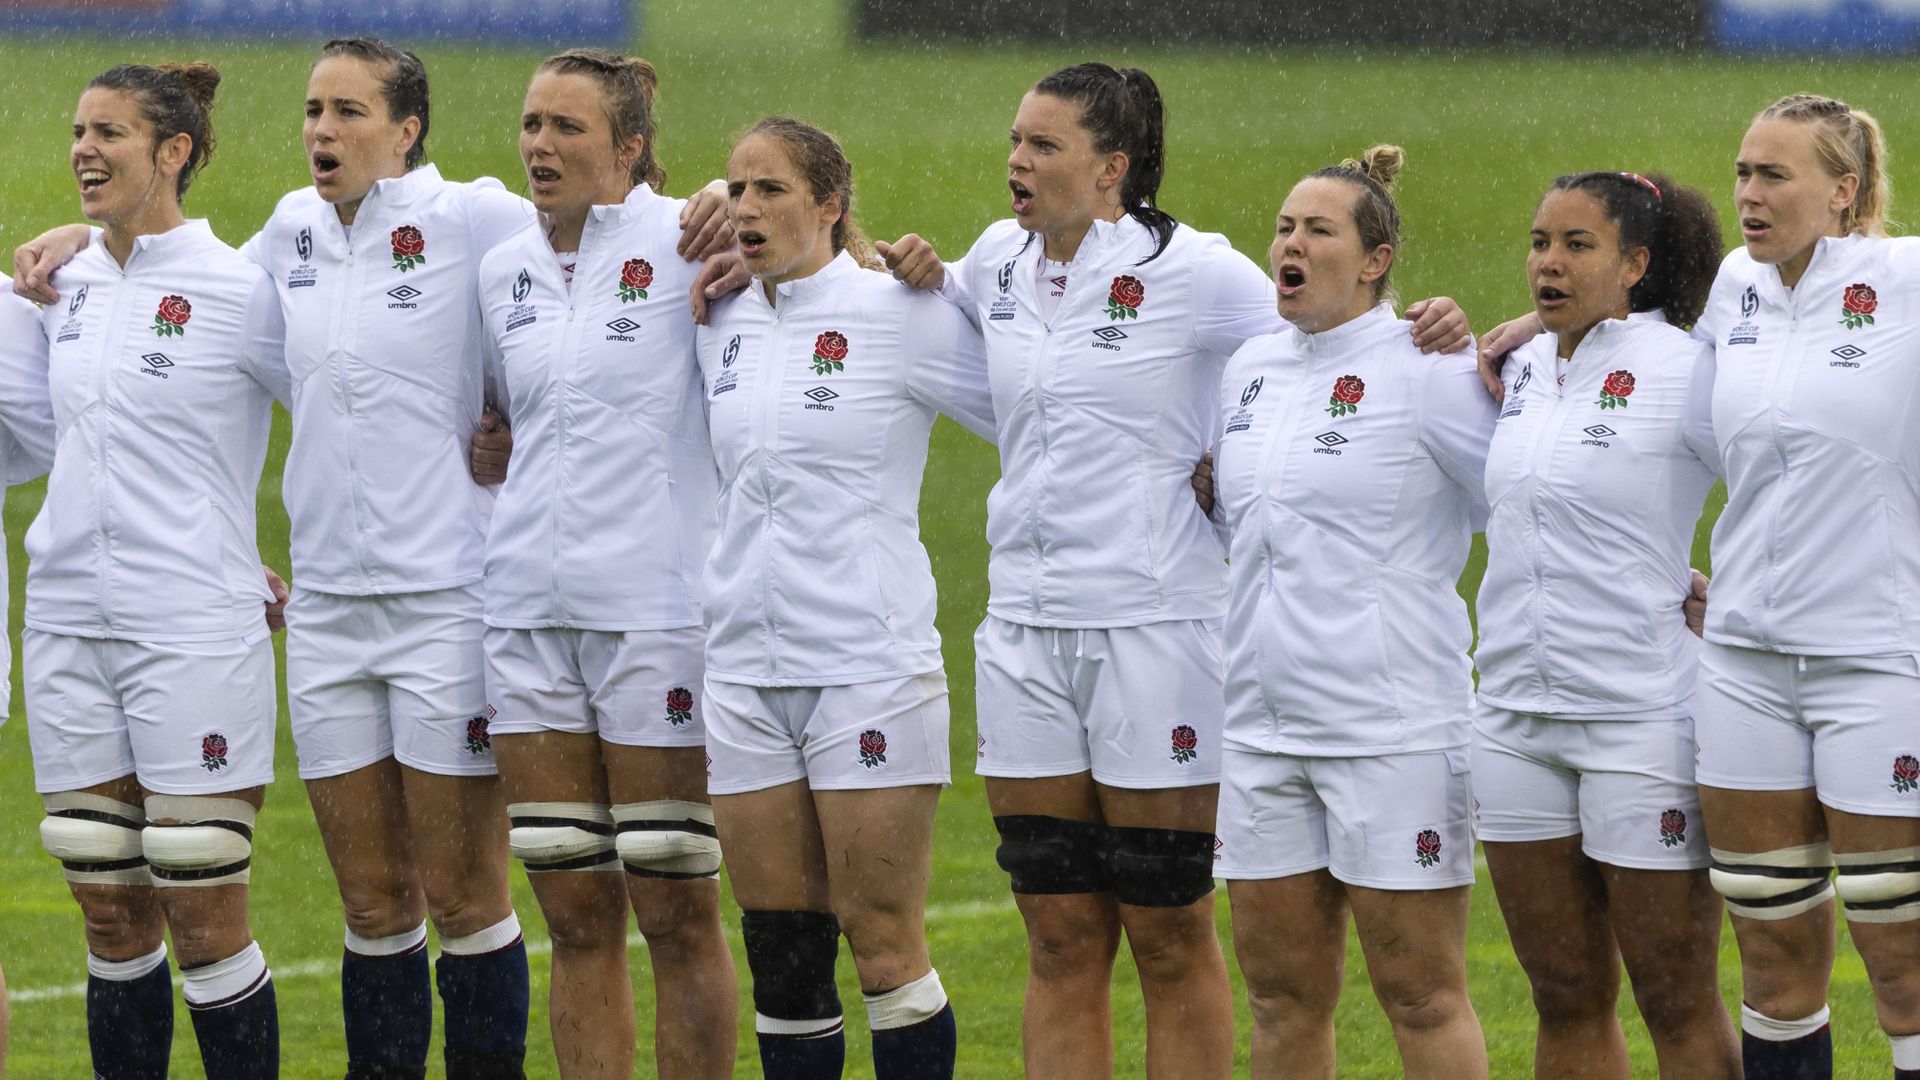 Red Roses: Five players to watch in Women's Rugby World Cup final